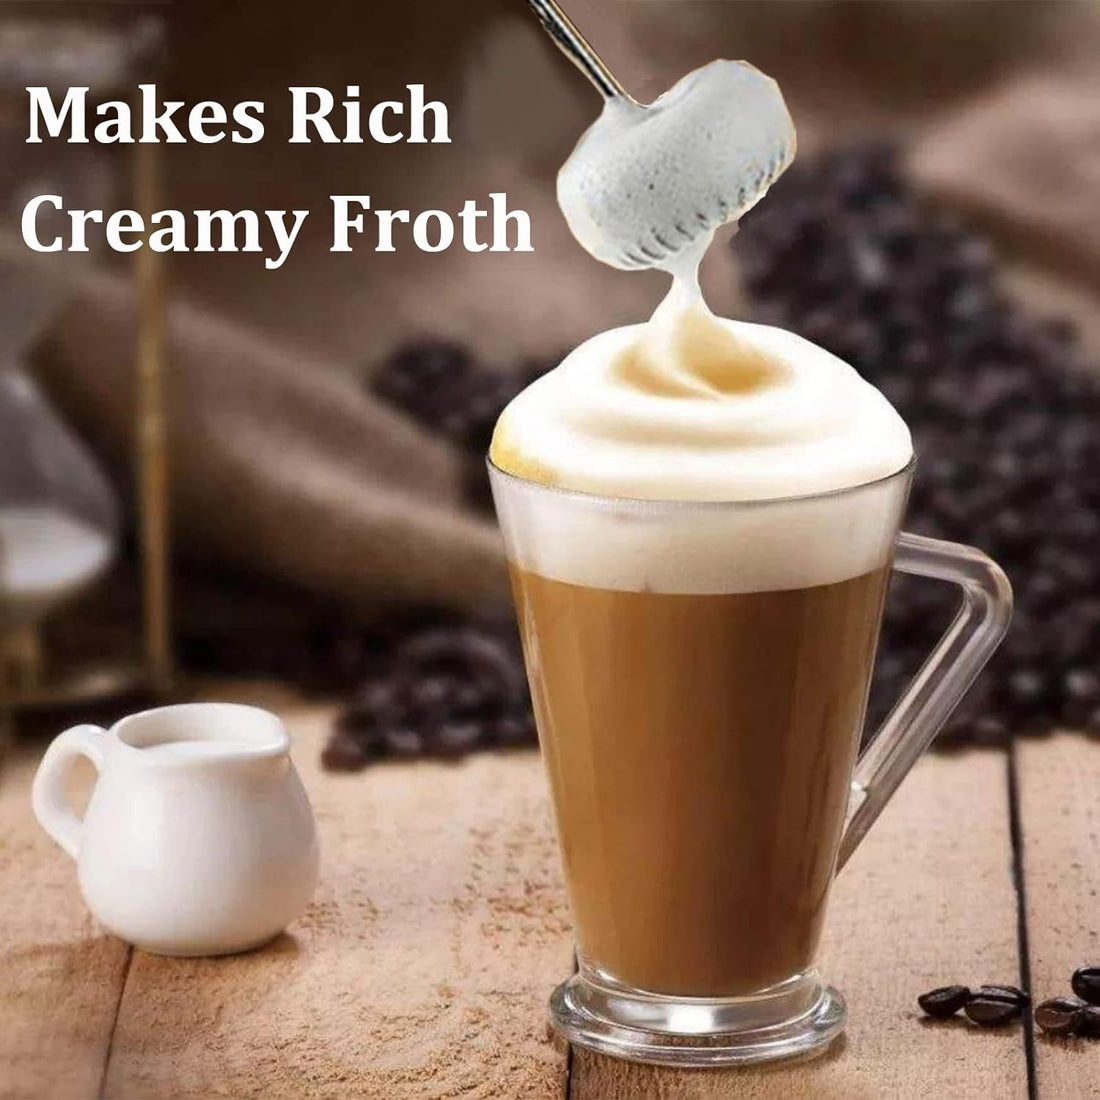 BASANIE Milk frother for coffee, lattes ,Whisk drink mixer, Mini foamer for Cappuccino, Frappe, Matcha, Hot Chocolate. Battery operated stainless foam maker handheld eletric frothers